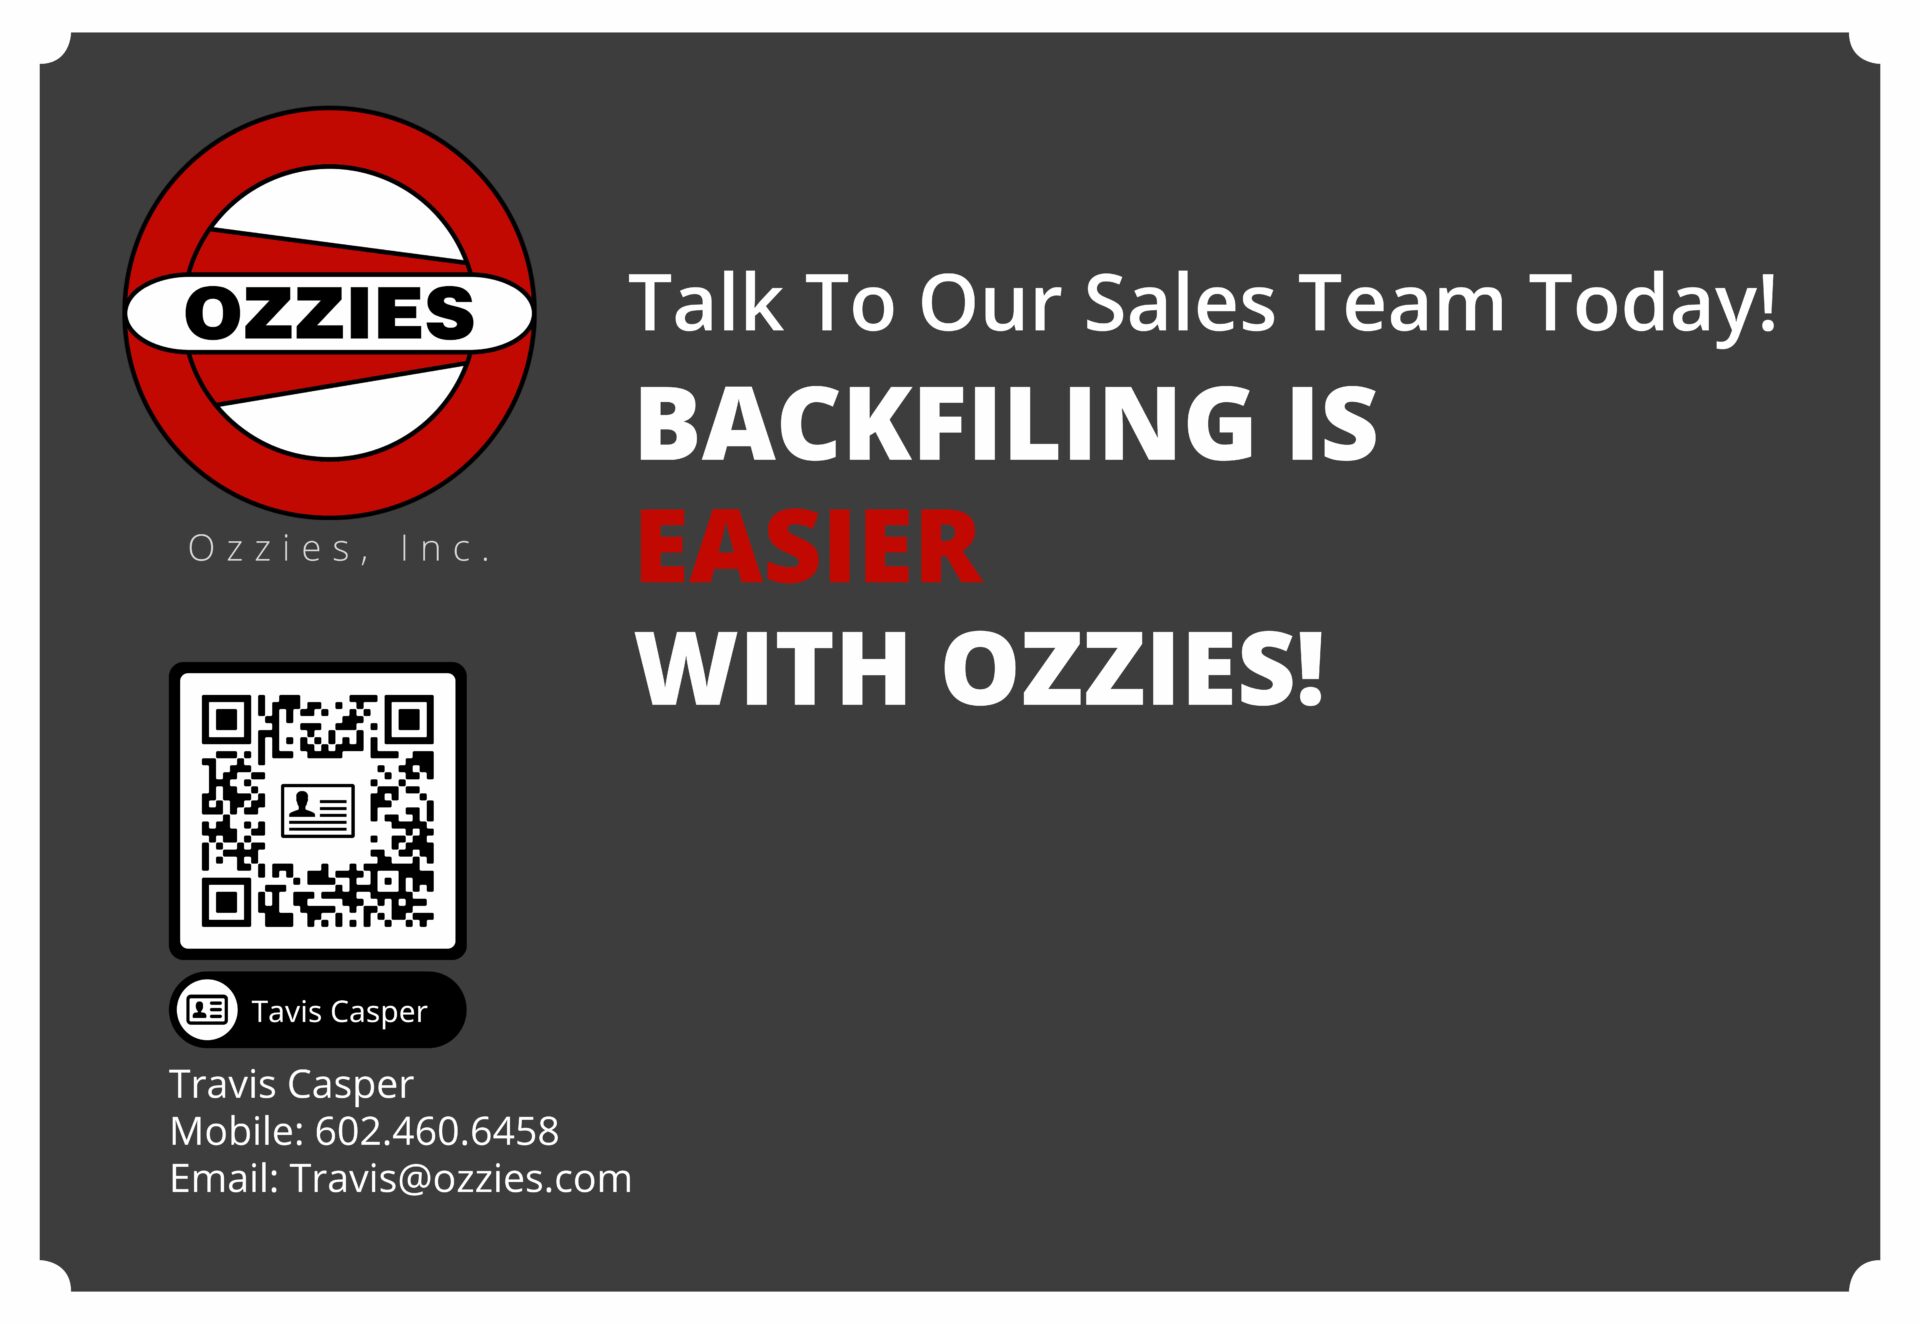 A picture of the back filing is easier with ozzies.